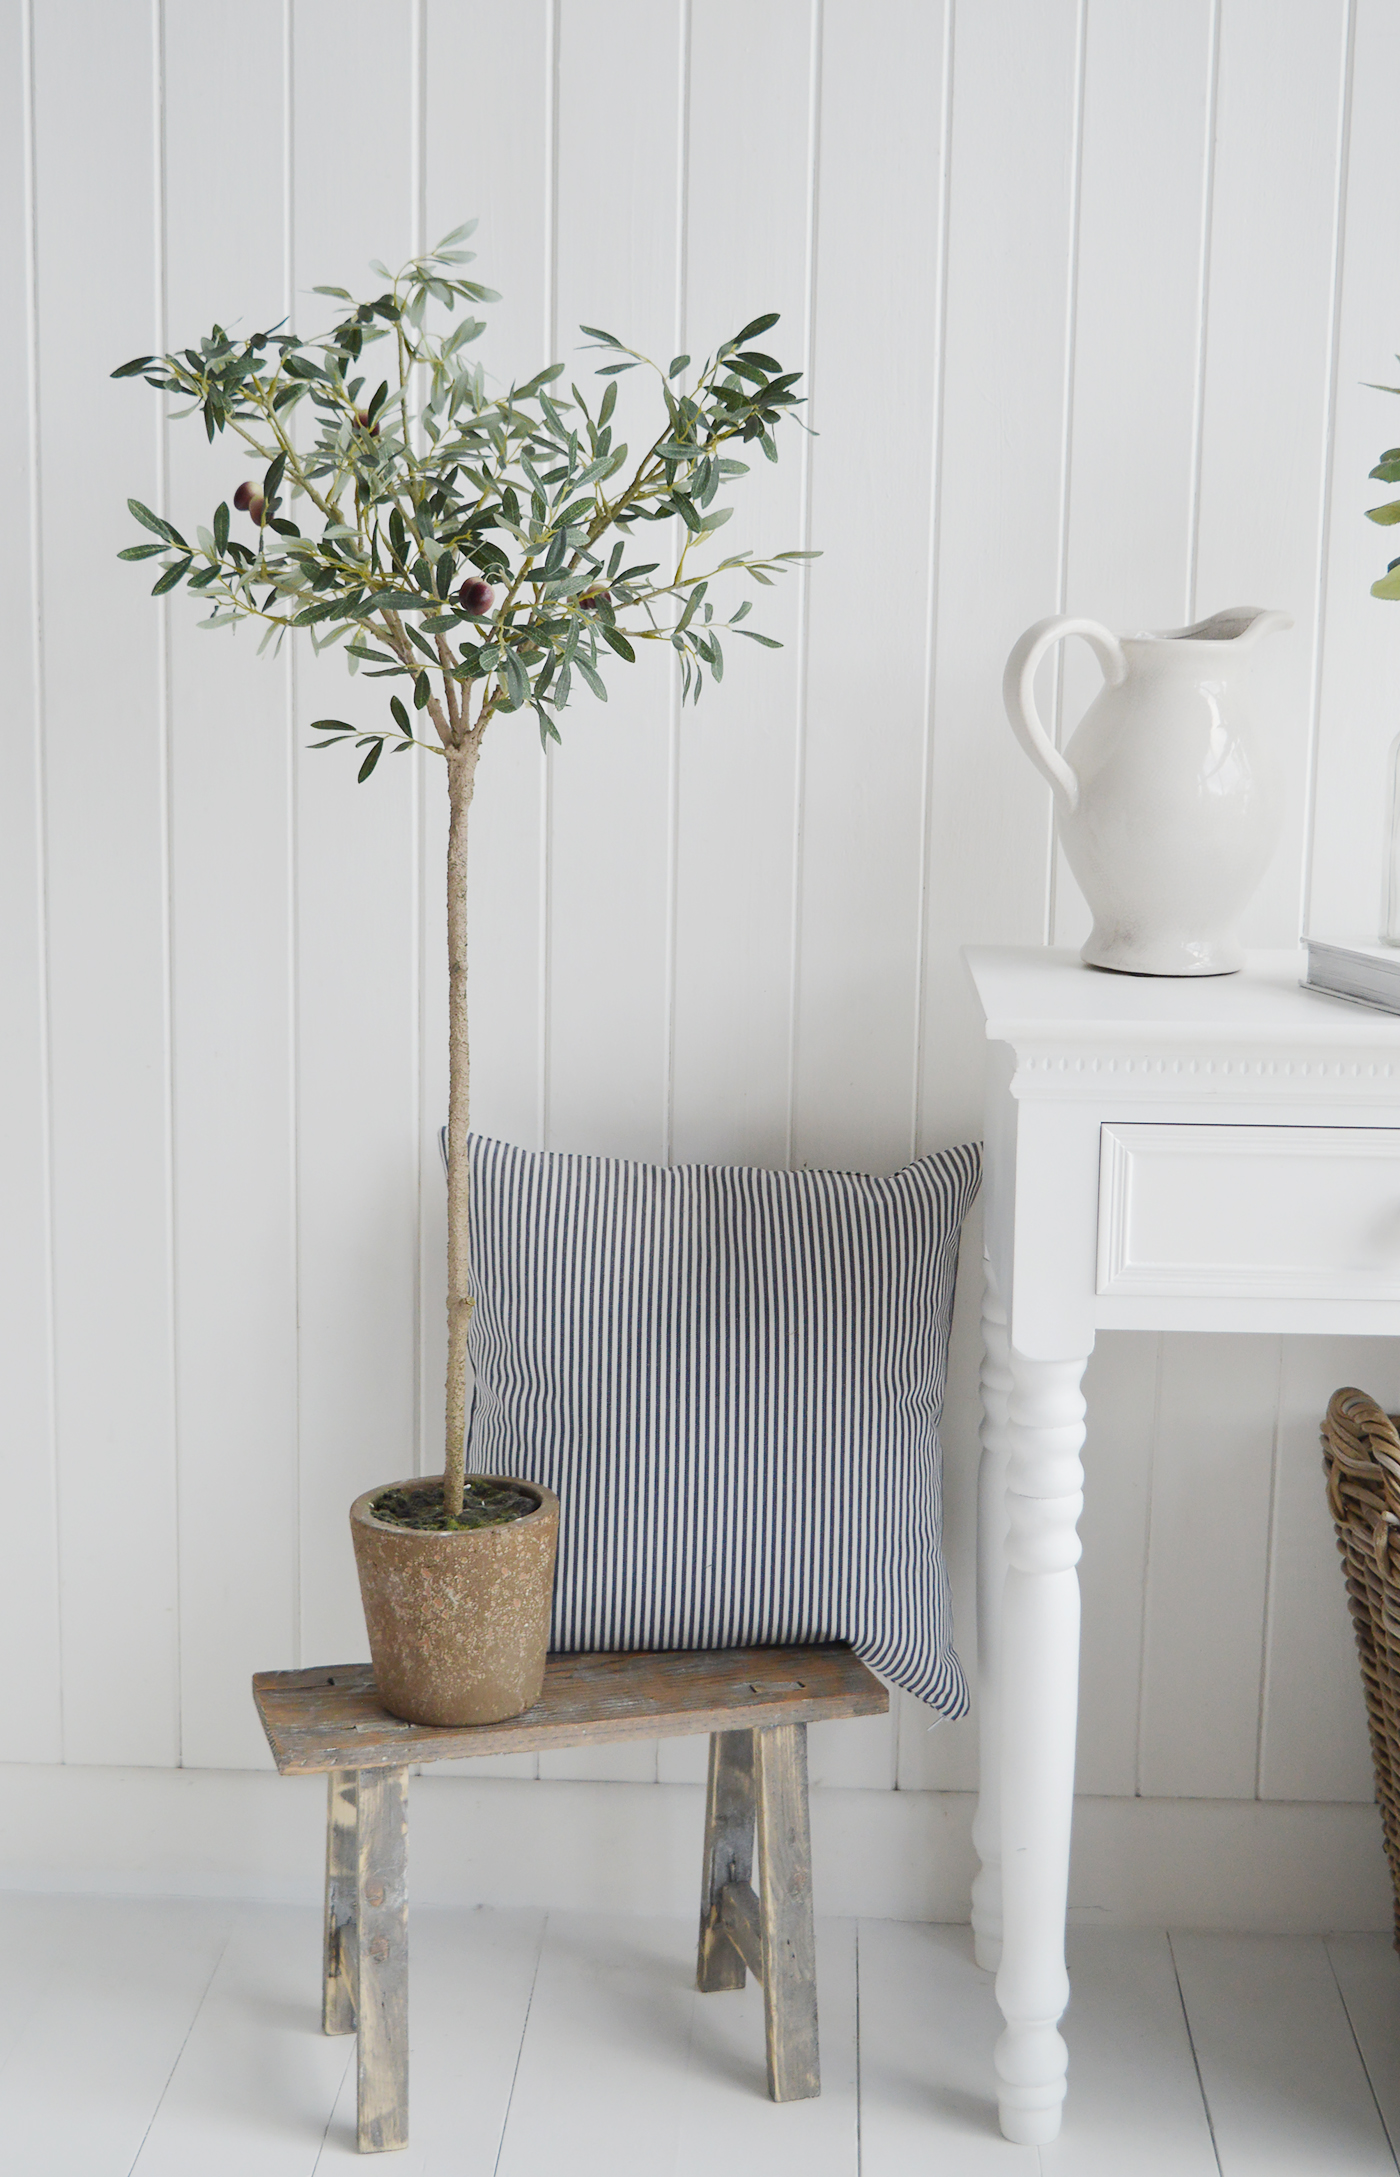 Realistic artificial Olive tree on the Pawtucket rustic plant table for New England style interiors for country, coastal homes, furniture and interiors